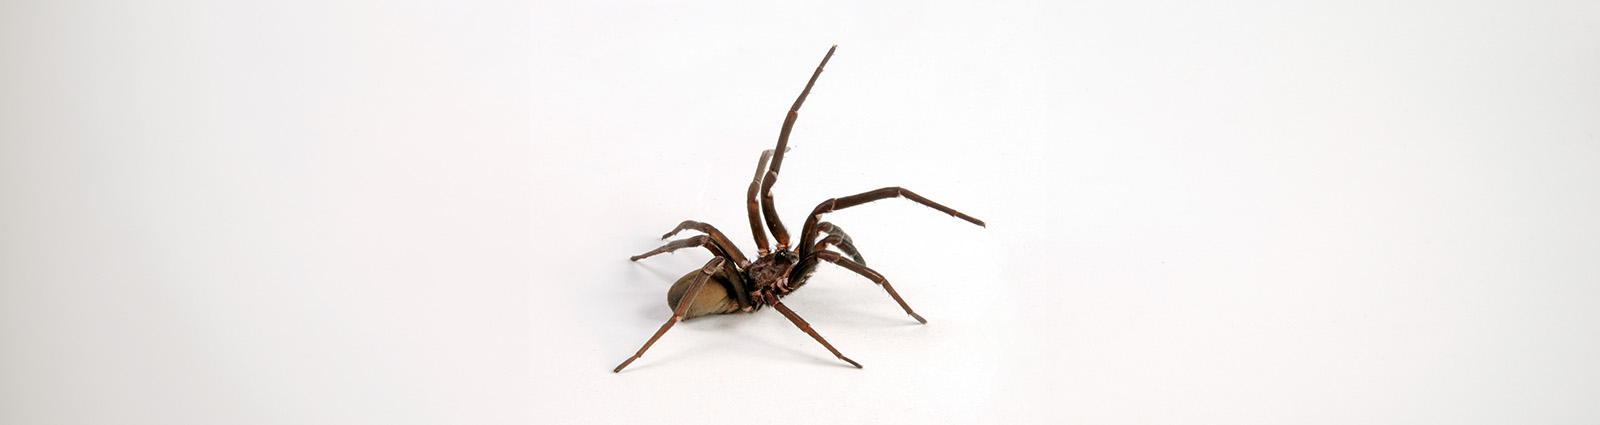 Spider on floor | O'Connor Pest Control